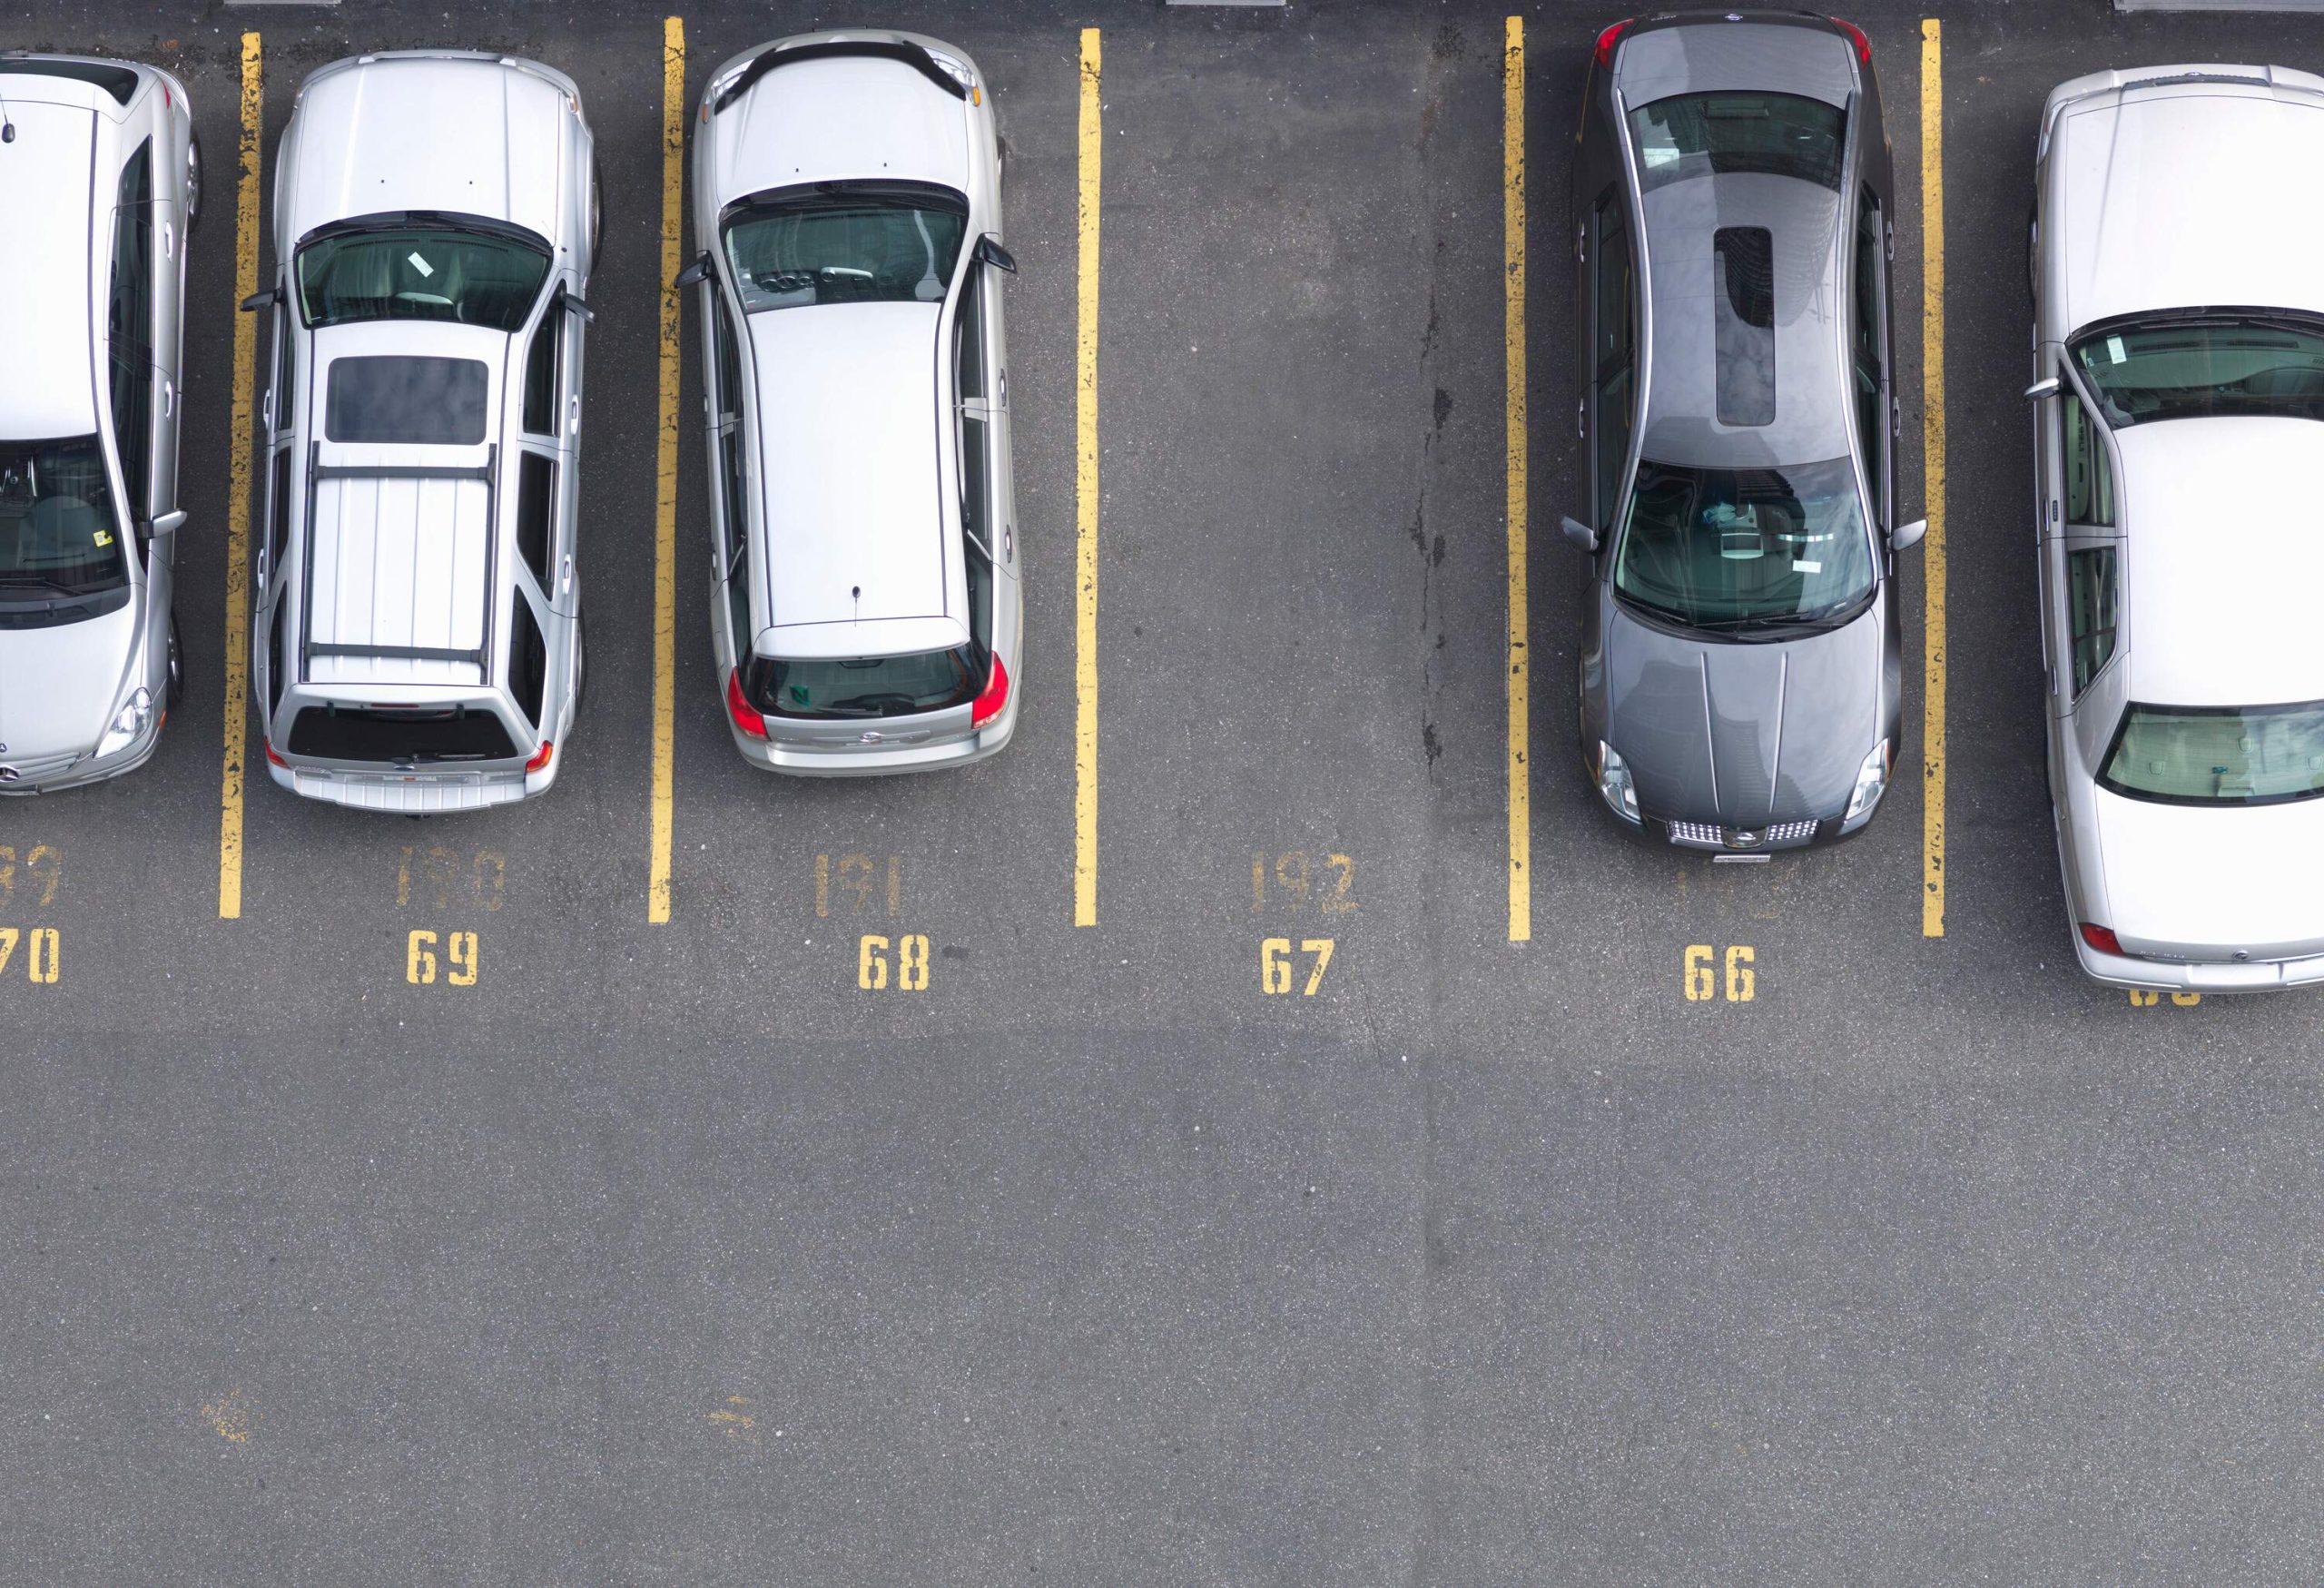 Cars parked in numbered parking spaces with one vacant spot.